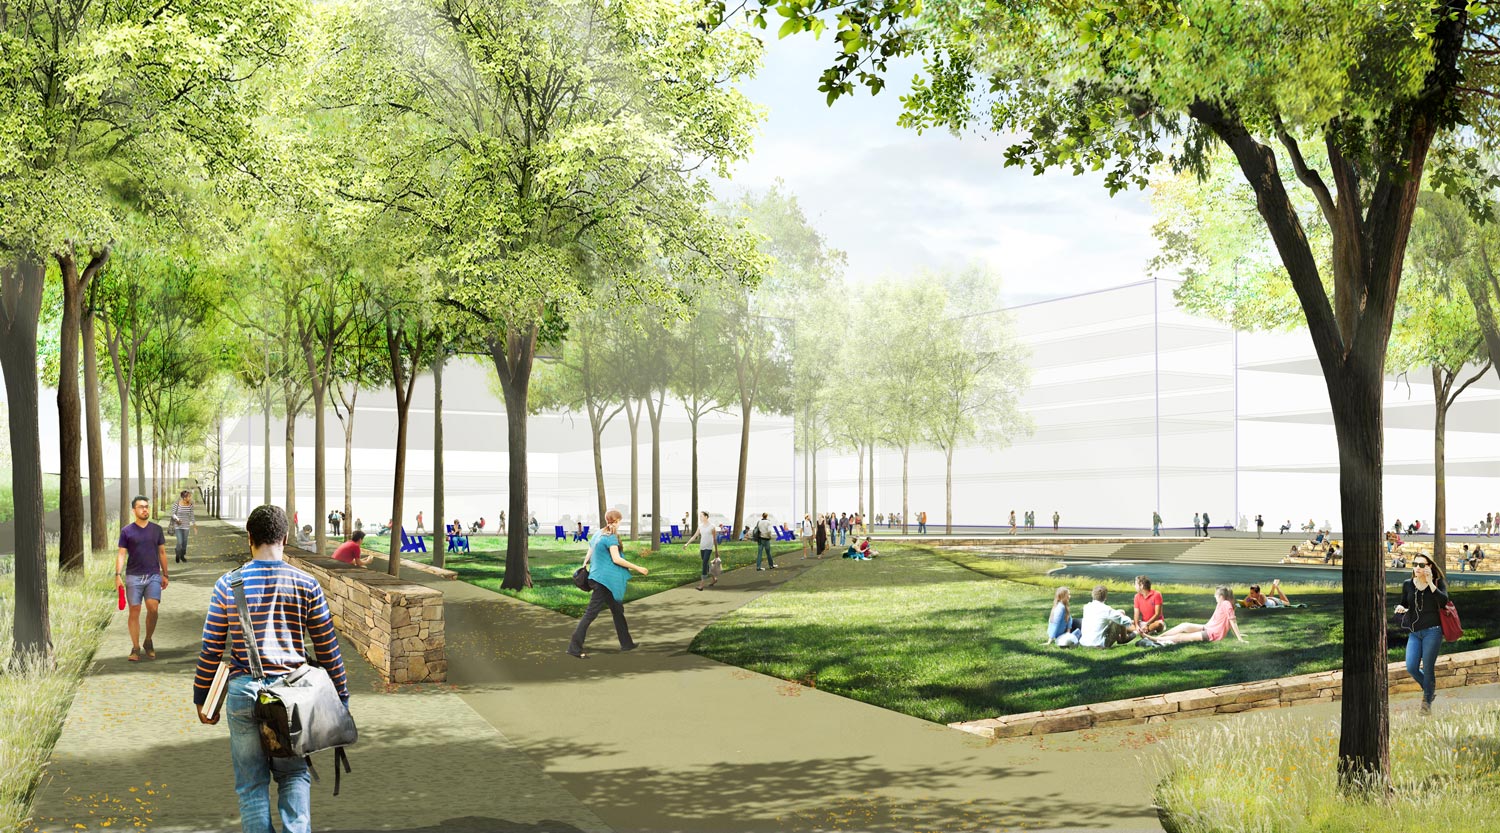 A Digital rendering of a large, open green space with students sitting in groups and walking on sidewalks